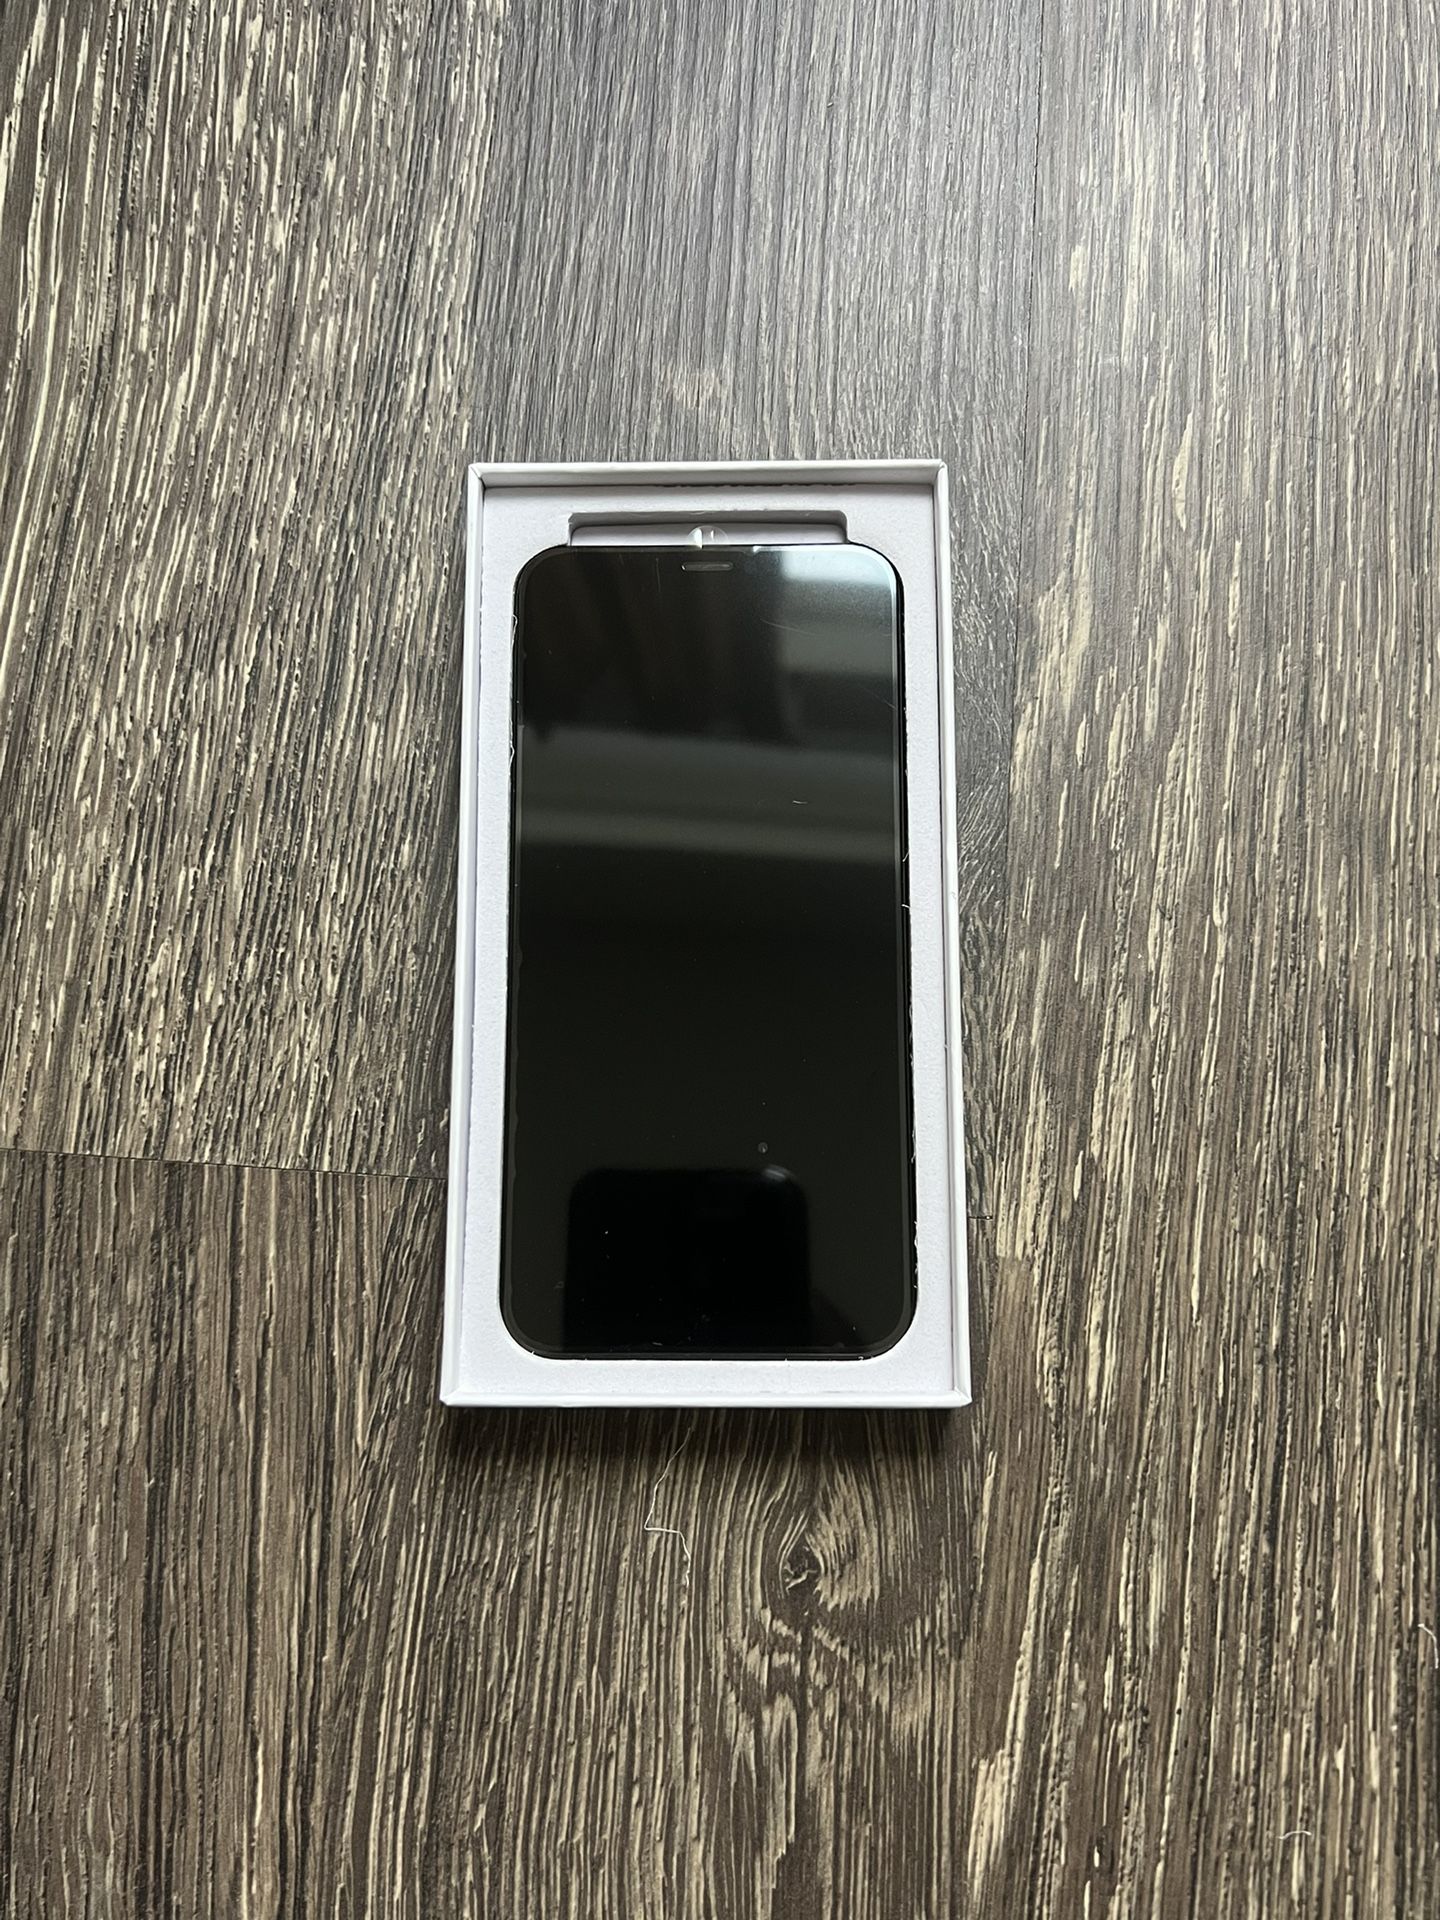 iPhone X LCD Digitizer Touch Screen Assembly Part